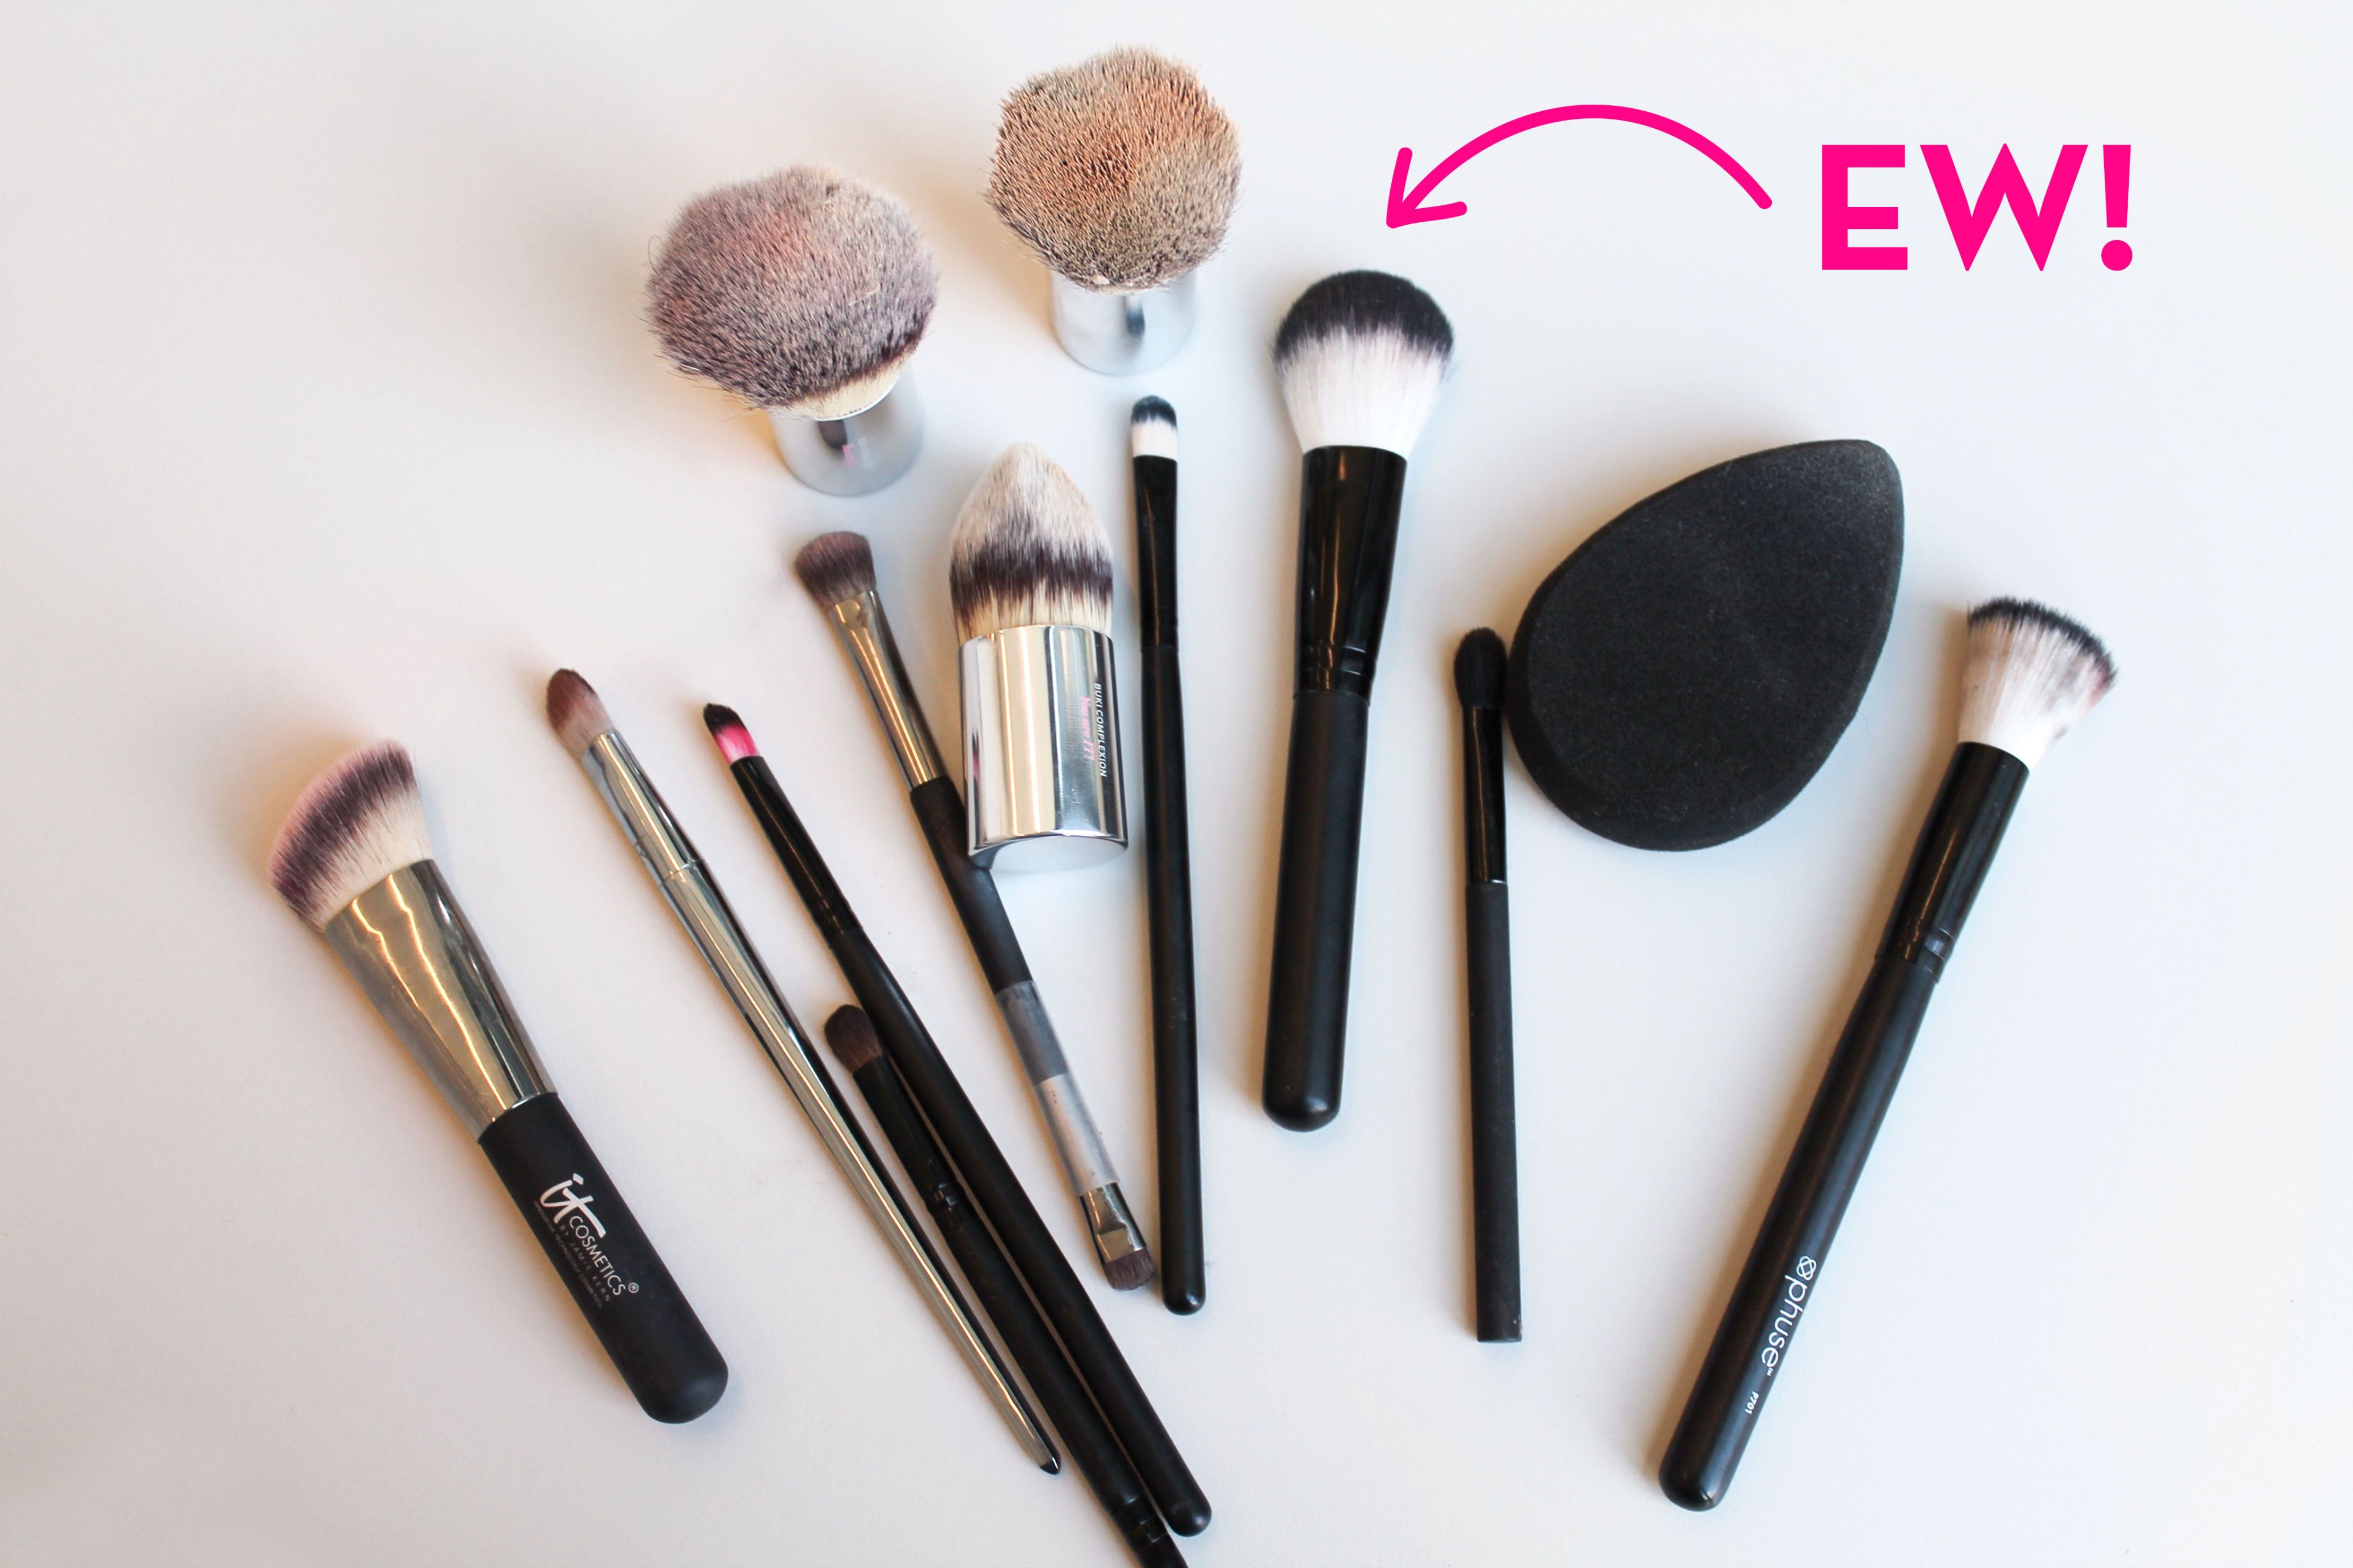 what can i use to clean my makeup brushes